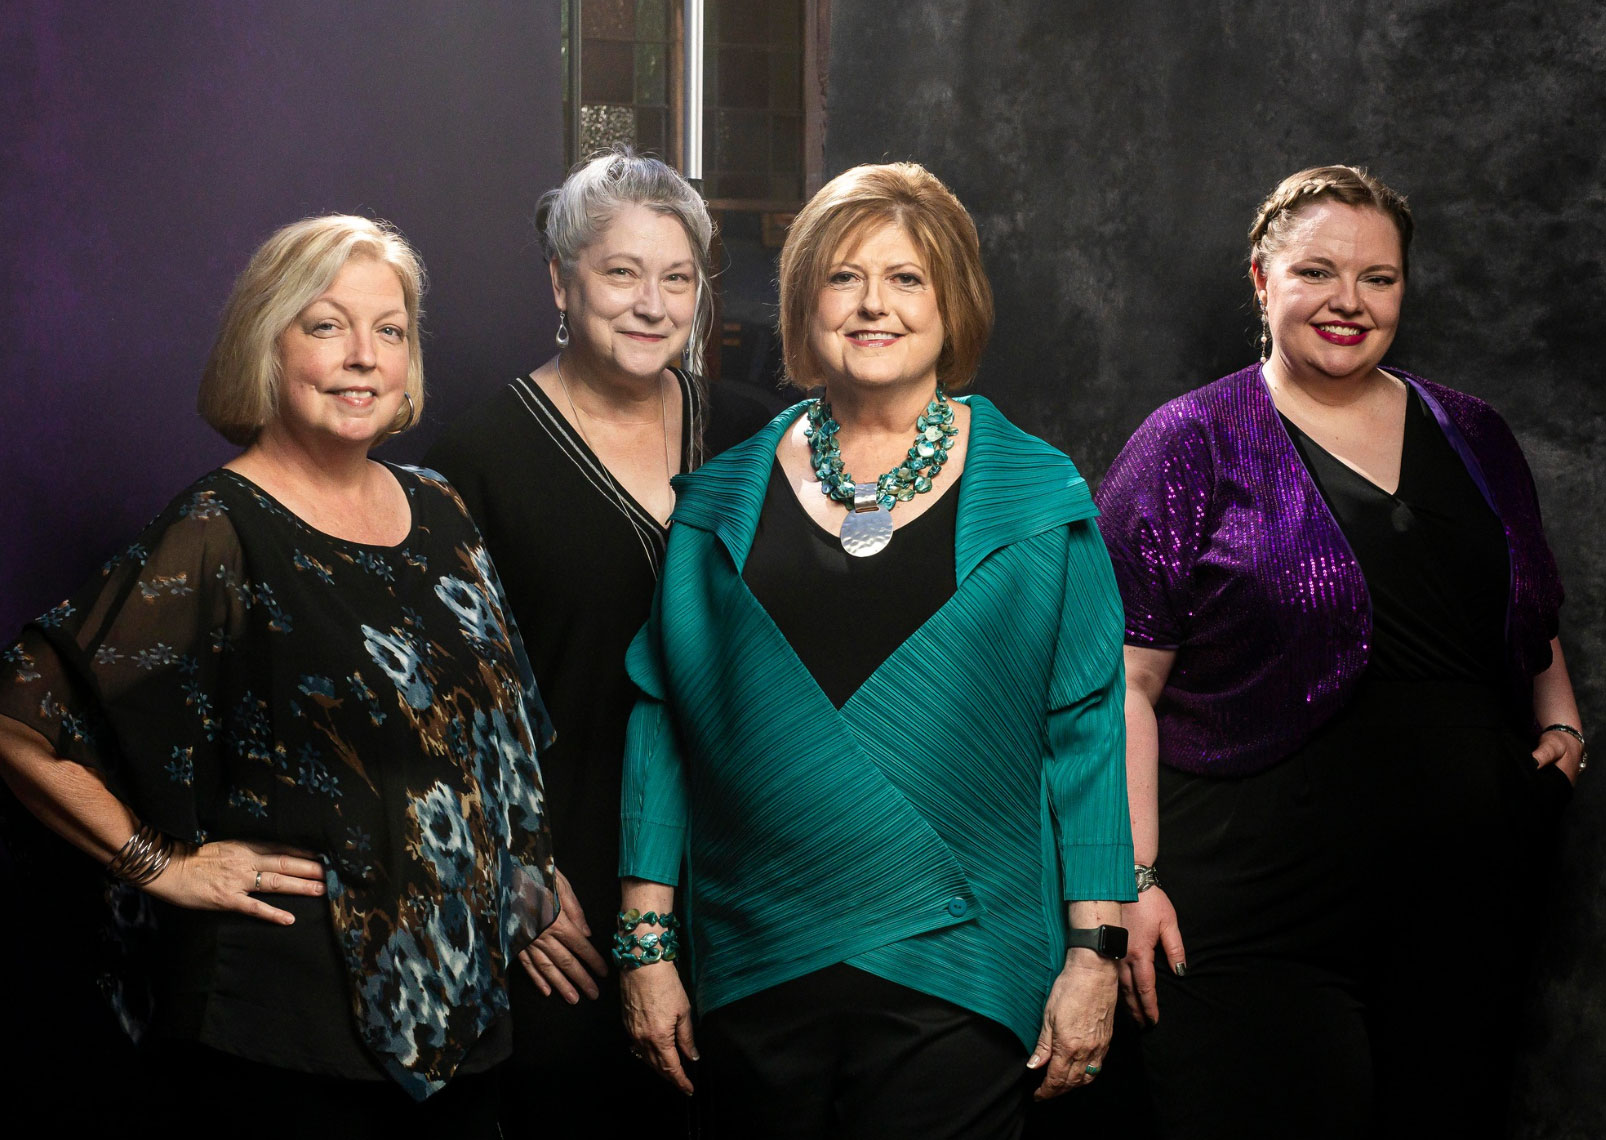 Mary Collins Agency team members Alice Galipp, Kim Trusty, Mary Collins, and Sara Rhodes